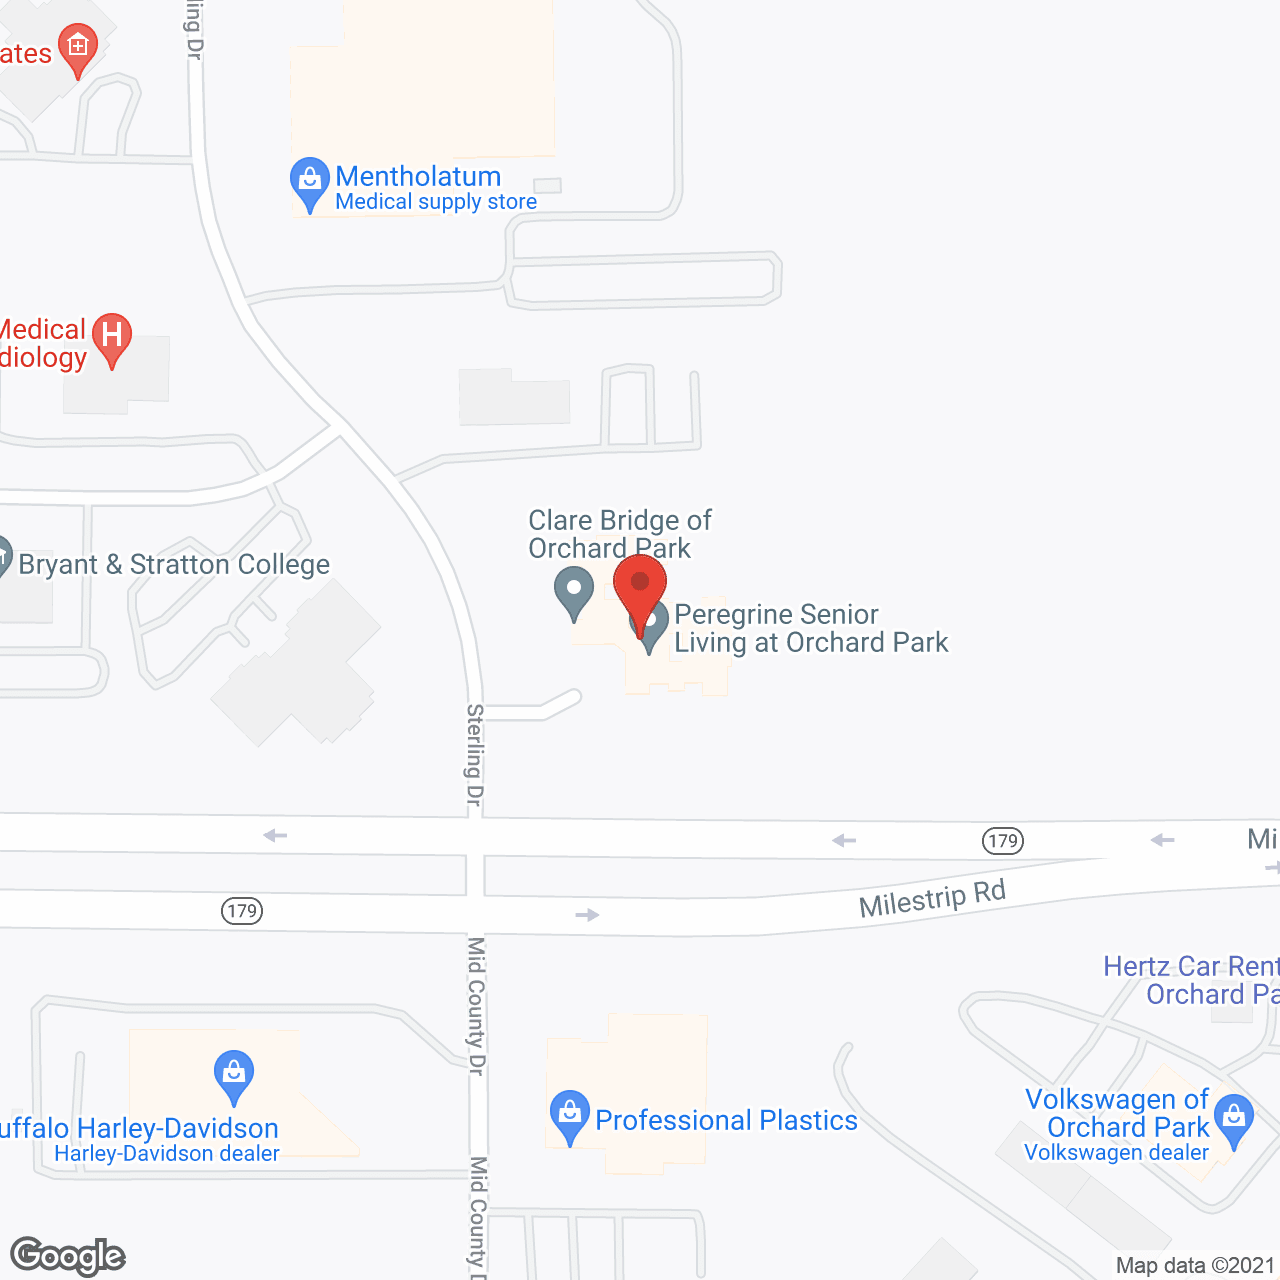 Peregrine Senior Living at Orchard Park in google map